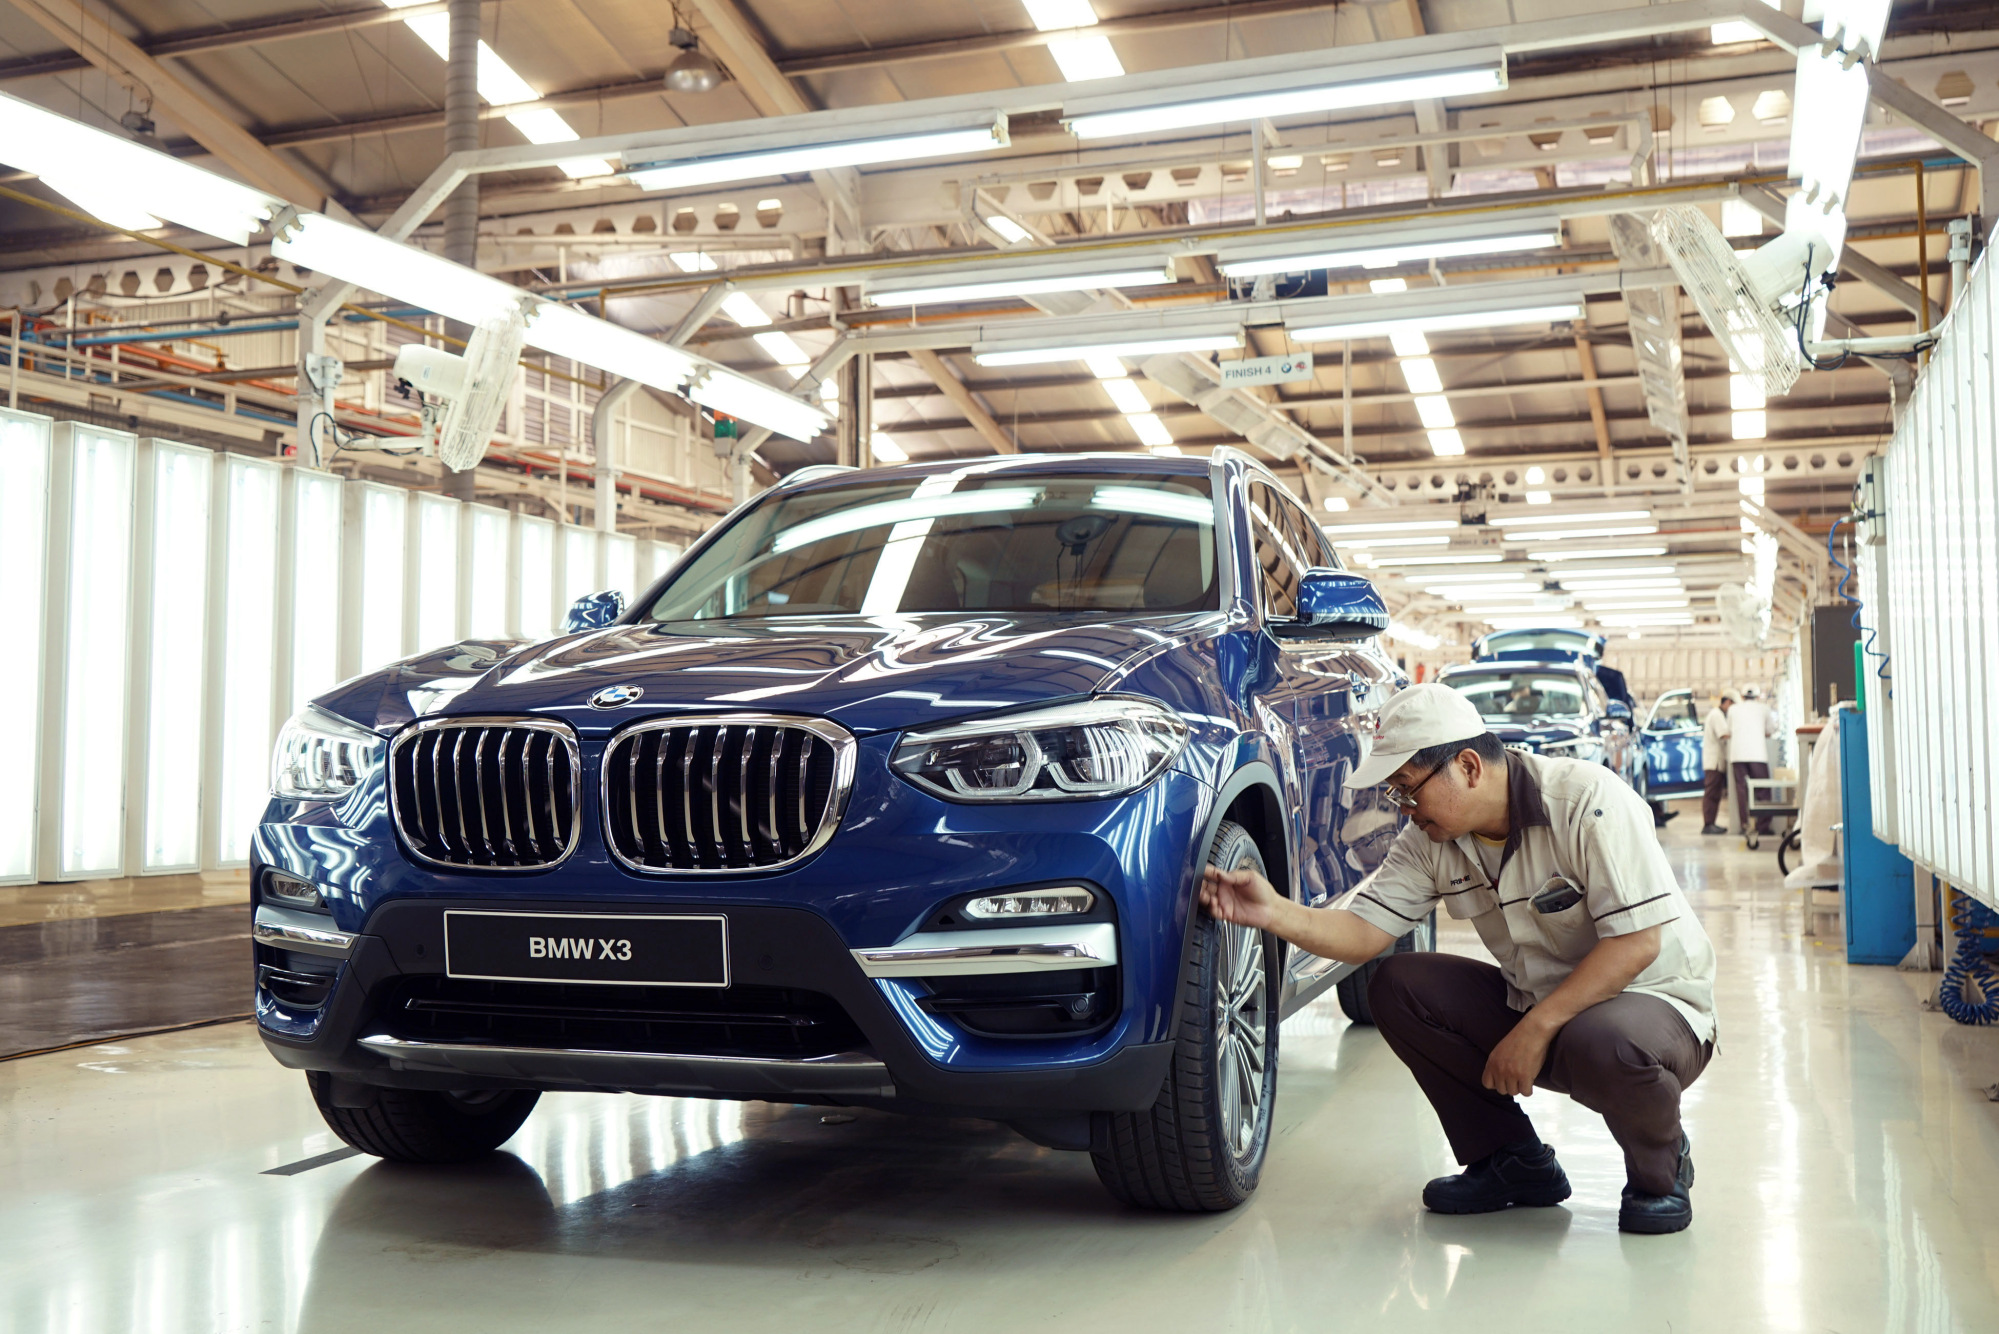 Assembly of the New BMW X3 as Indonesia Reviews Trade-Related Policies to Mitigate Trade War